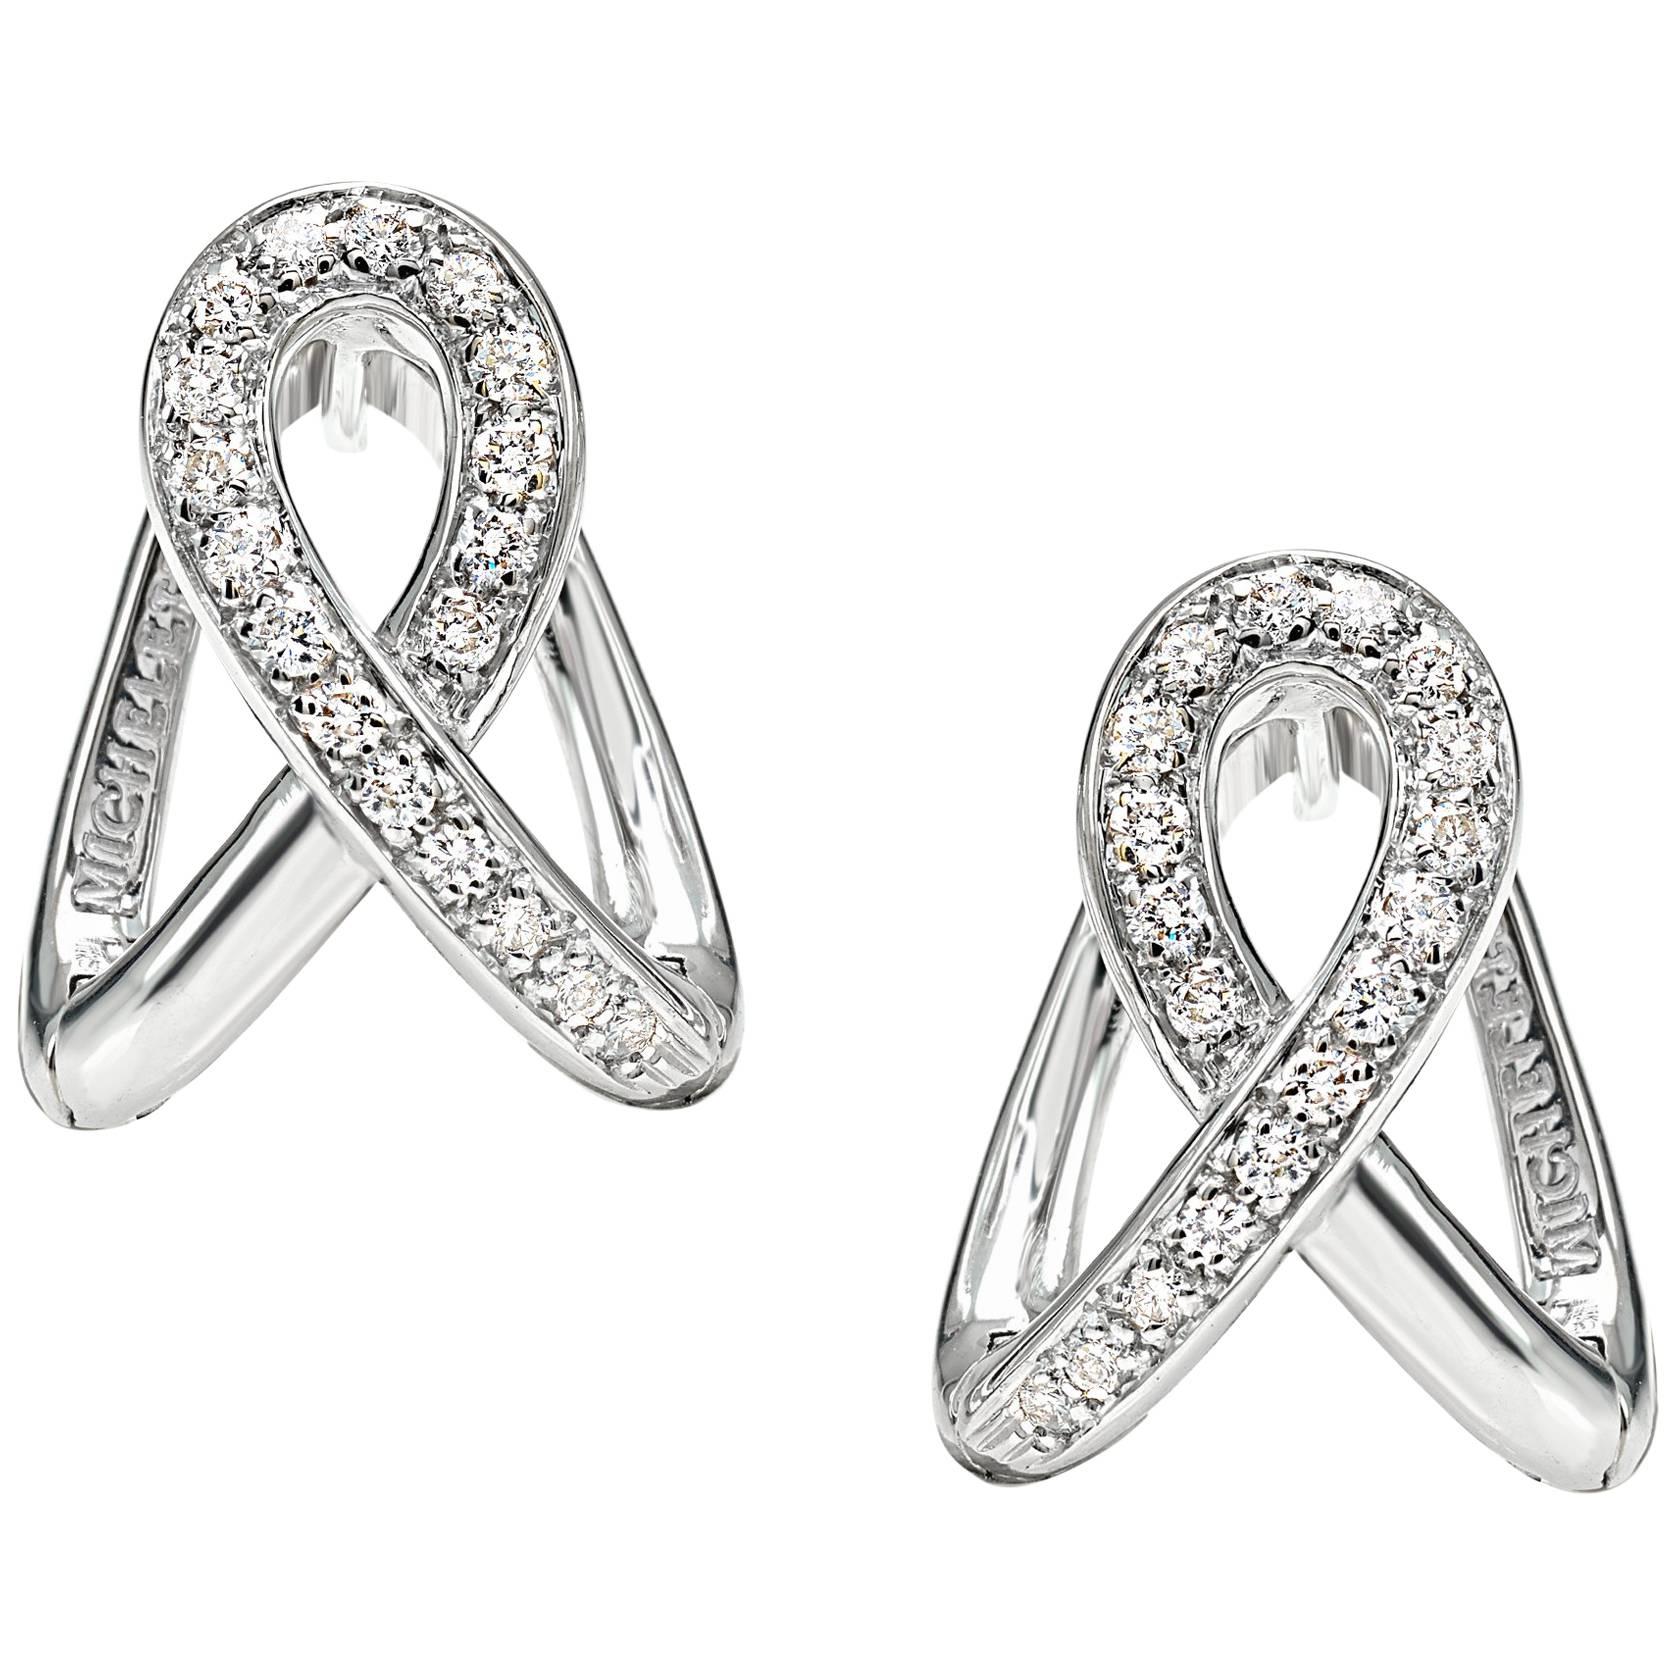 Earrings from the Collection "Essence" 18 Karat White Gold and Diamonds